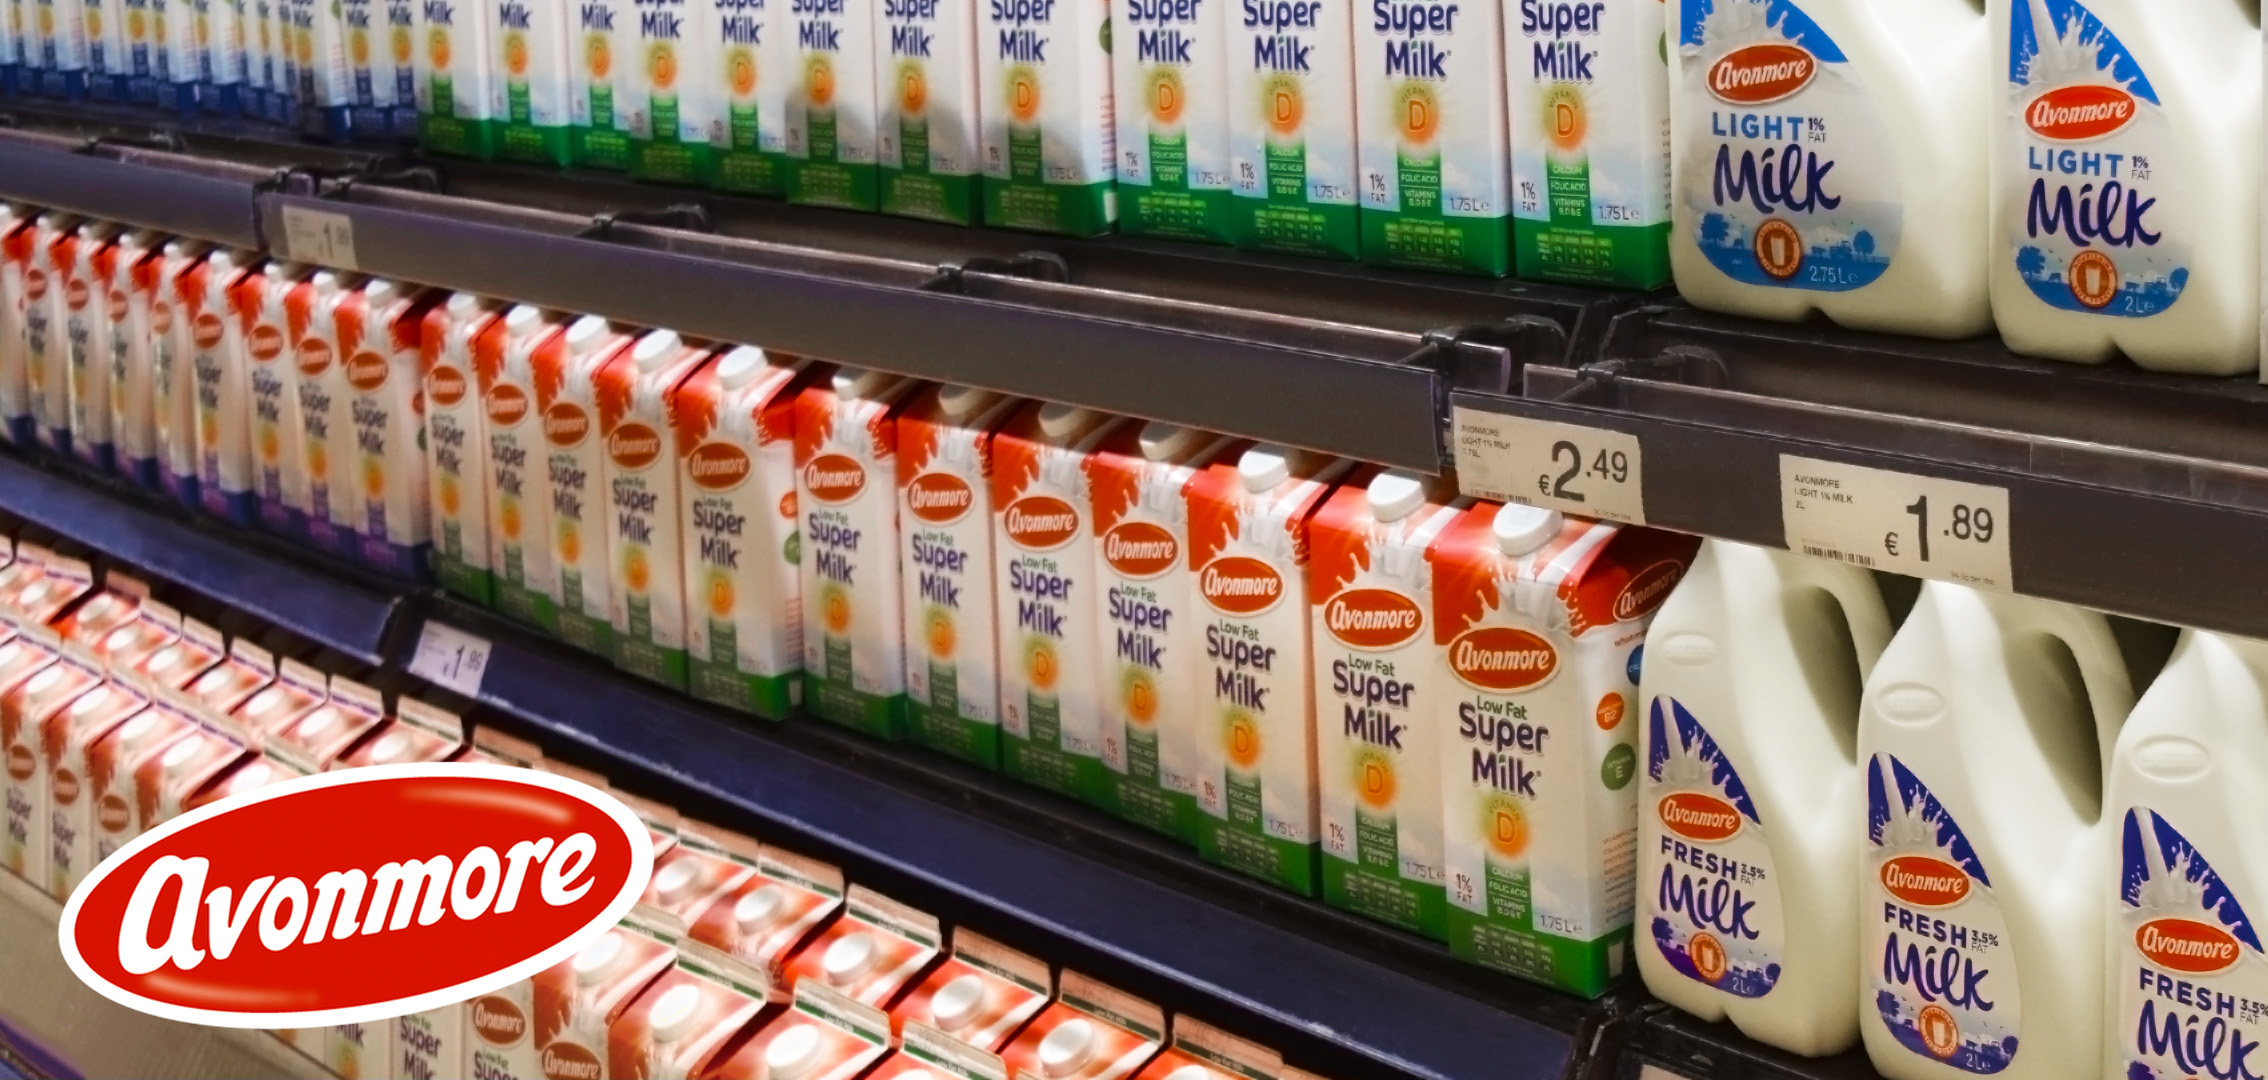 Avonmore and FMI: 16 Years of Unmatched Milk Distribution in Ireland